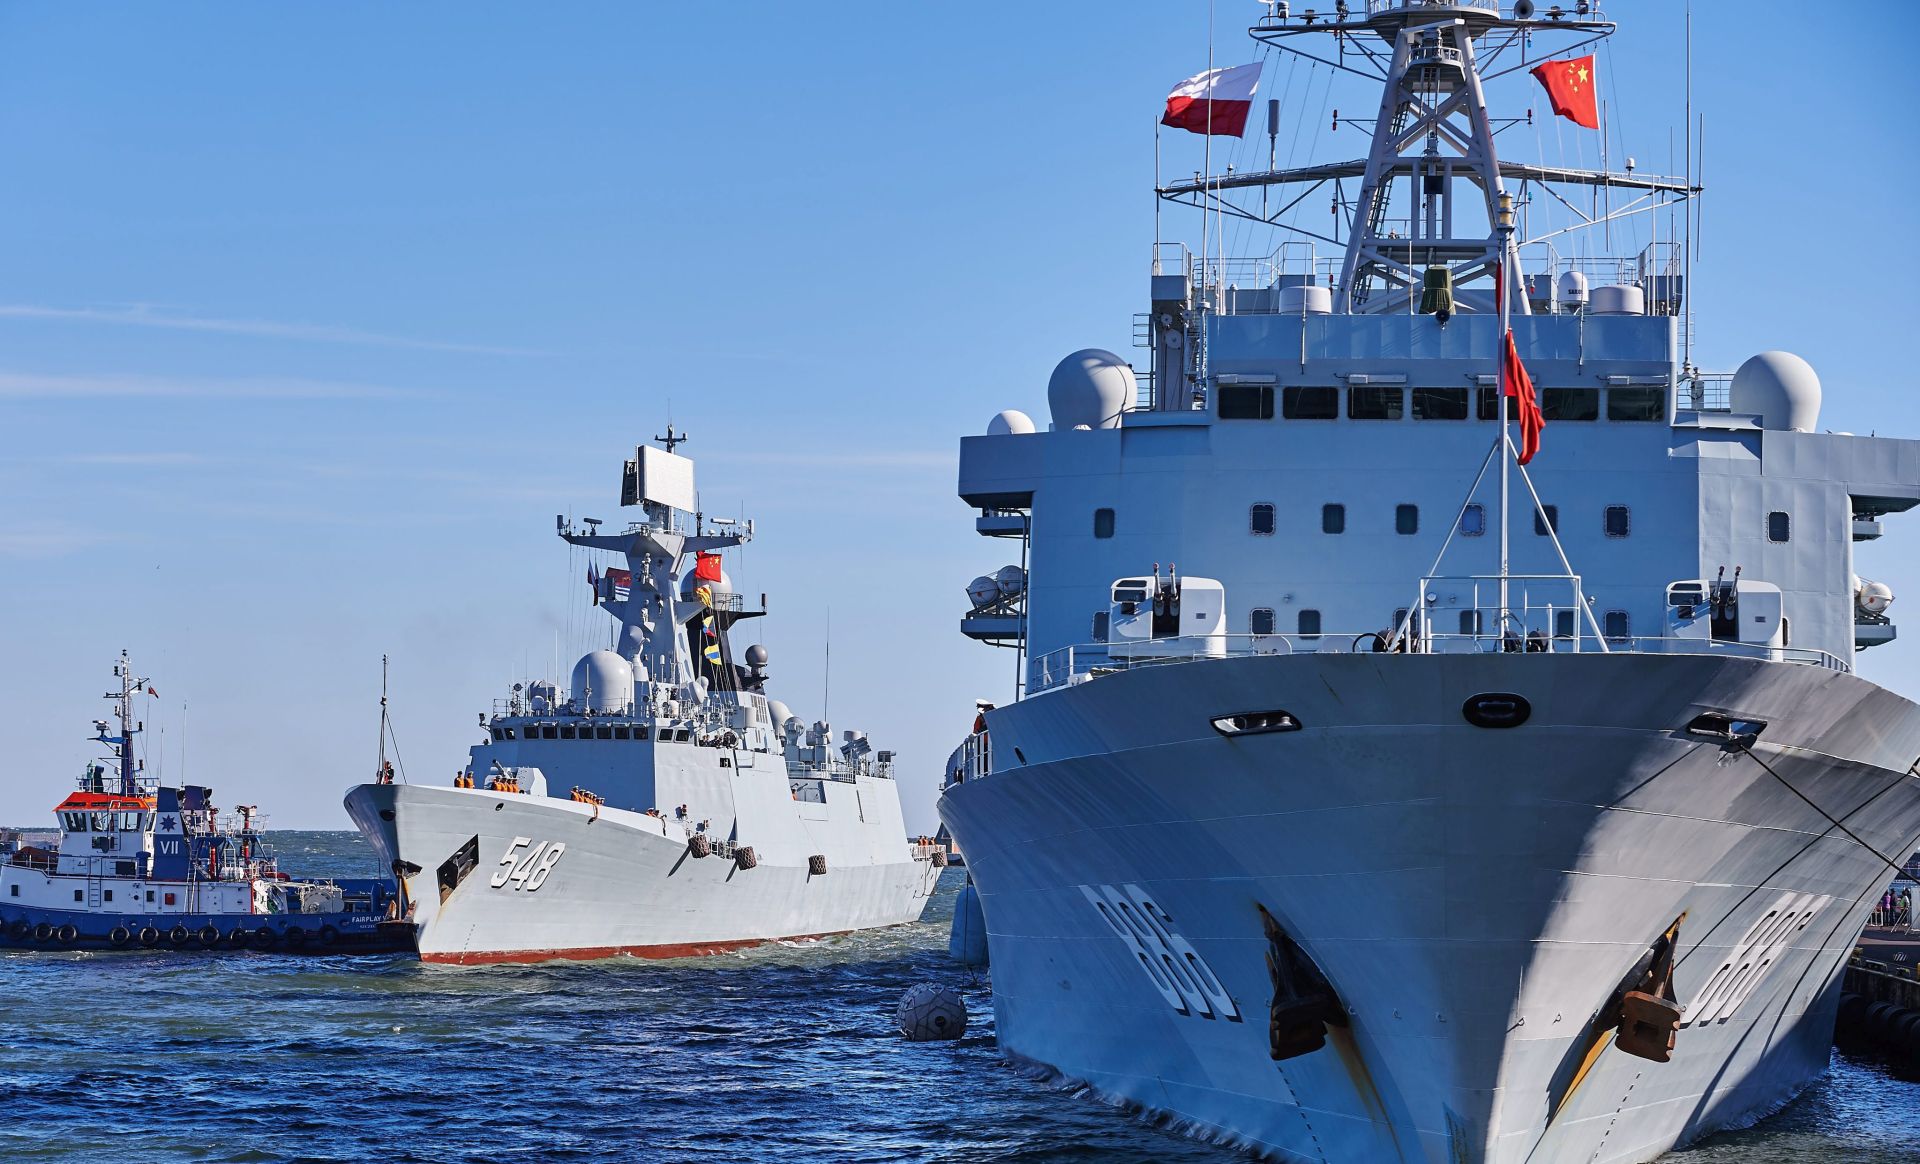 epa04967162 Chinese Navy replenishment ship 'Qiandaohu' (R) and multi-role frigate 'Yiyang' (L) are seen as they enter the port of Gdynia in Gdynia, Poland, 07 October 2015. Three Chinese naval vessels, a destroyer 'Jinan', a multi-role frigate 'Yiyang' and replenishment ship 'Qiandaohu', came to Gdynia for the Chinese Navy's first-ever visit to Poland. The ships are part of a task force which recently completed an anti-piracy mission in the Gulf of Aden. The ships are currently on a five-month tour of seaports worldwide and have already visited Sudan, Egypt, Denmark, Finland and Sweden. The visit to Poland is aimed at developing friendly relations and exchange between China and Poland.  EPA/ADAM WARZAWA POLAND OUT